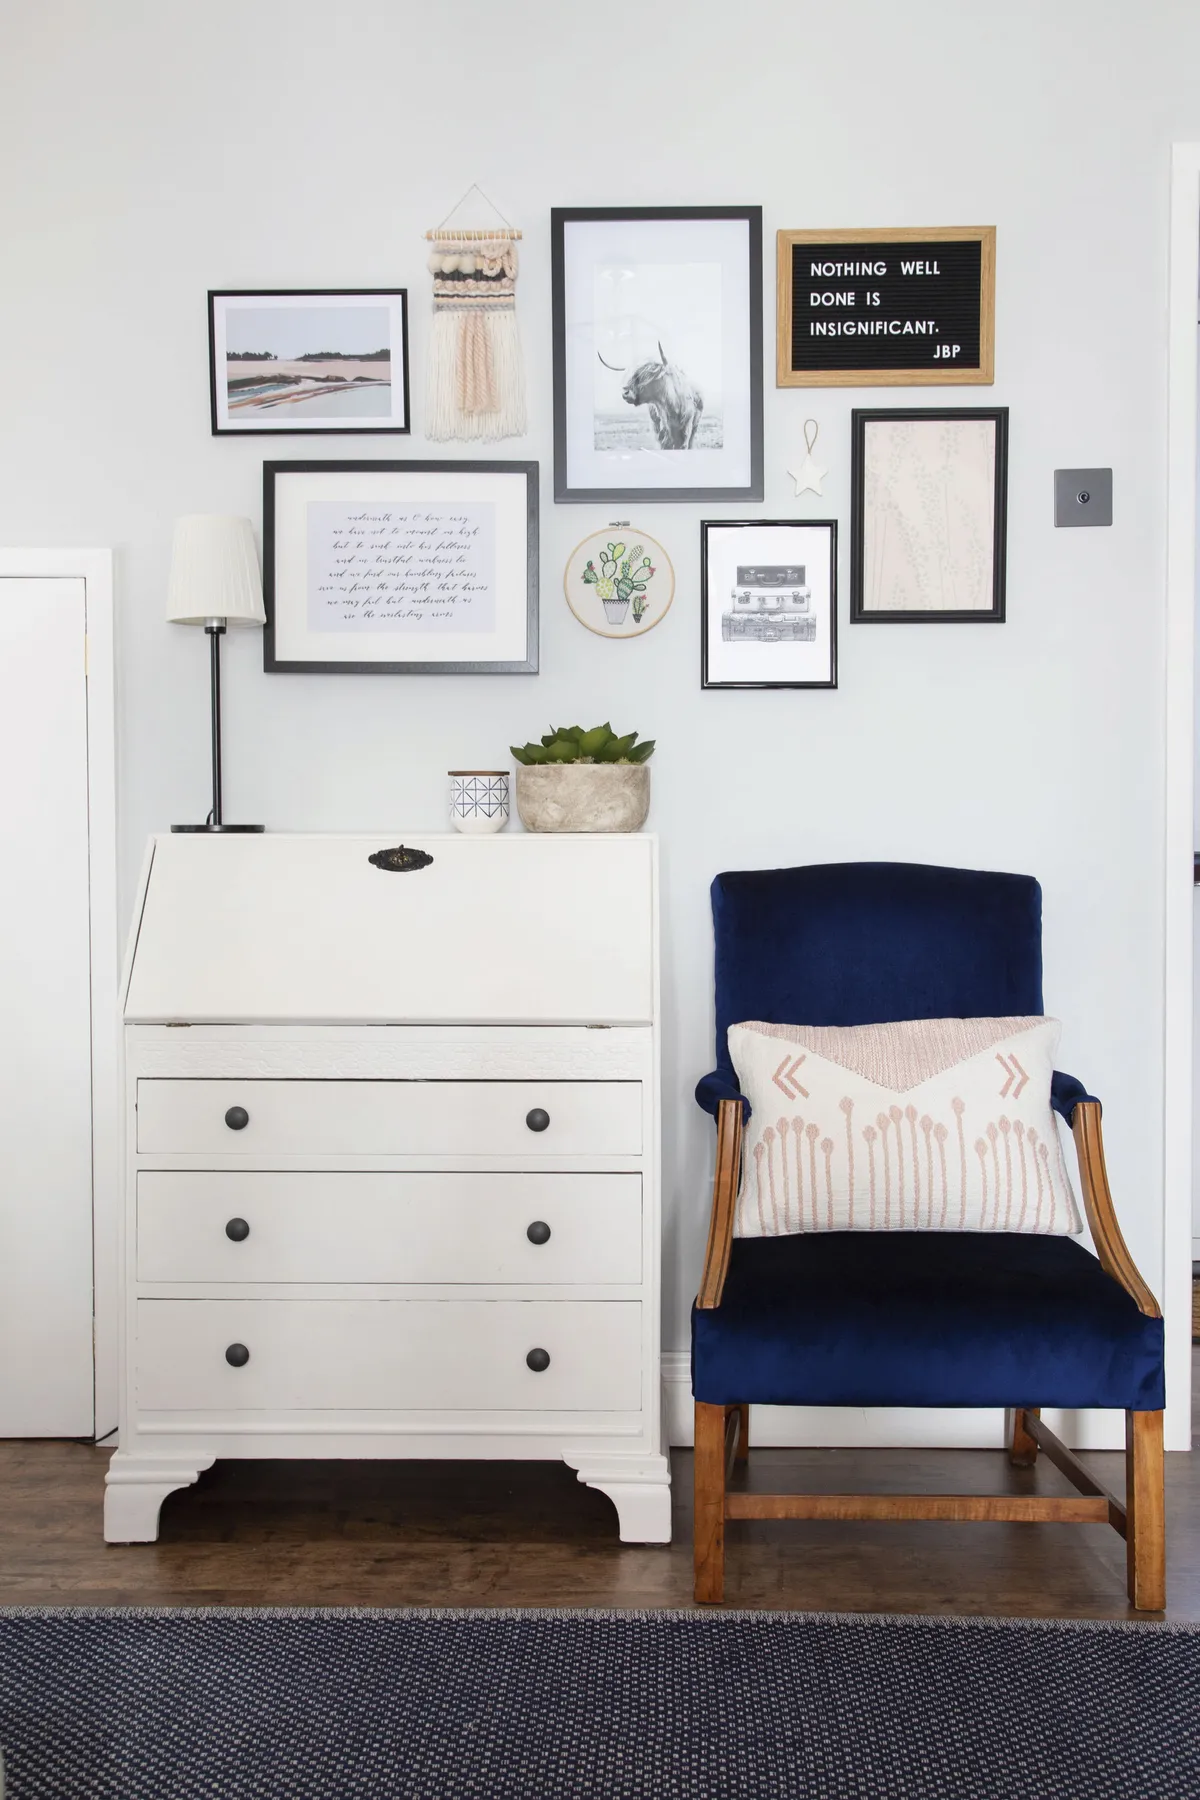 ‘The bureau was a second-hand buy from eBay that I upcycled with white paint, and the navy armchair was another eBay steal, which I reupholstered in velvet,’ Ruth says. ‘The latter was my first ever project – luckily it worked out alright’